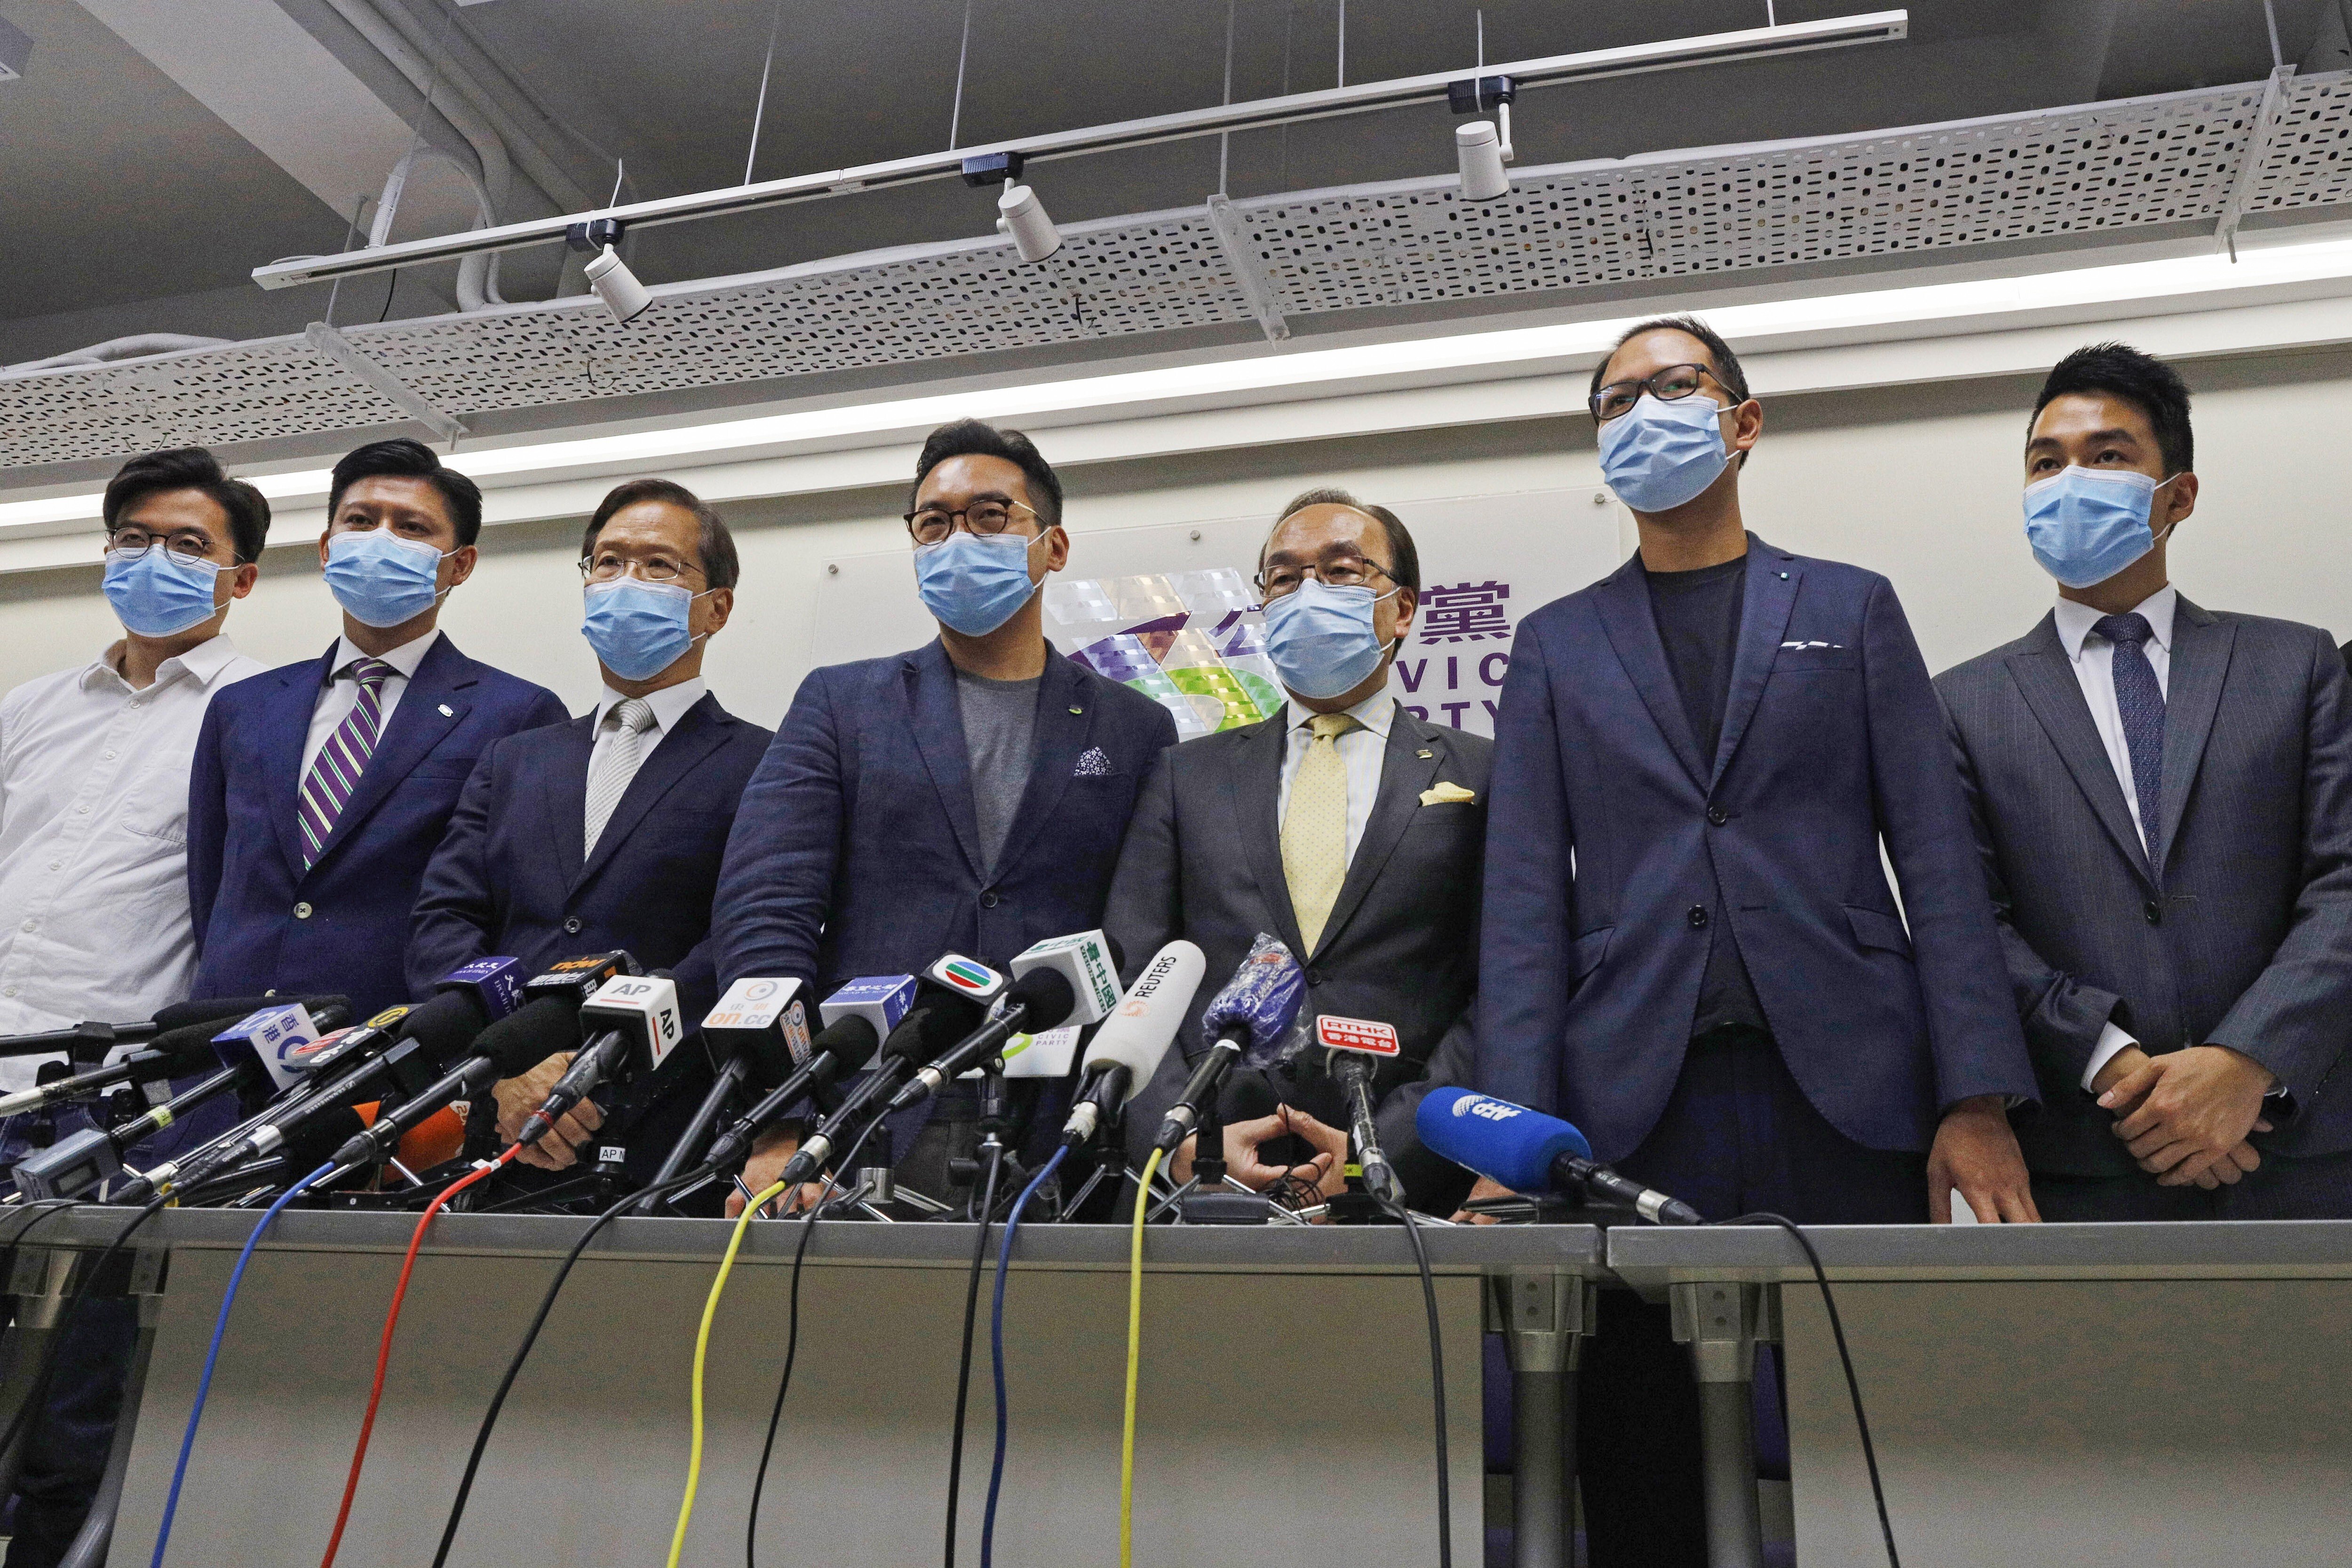 The Civic Party held a press conference on July 30, after four of its members, including incumbent lawmakers Kwok Ka-ki (third from left), Alvin Yeung (fourth) and Dennis Kwok (sixth), were disqualified from the Legco elections. Photo: AP